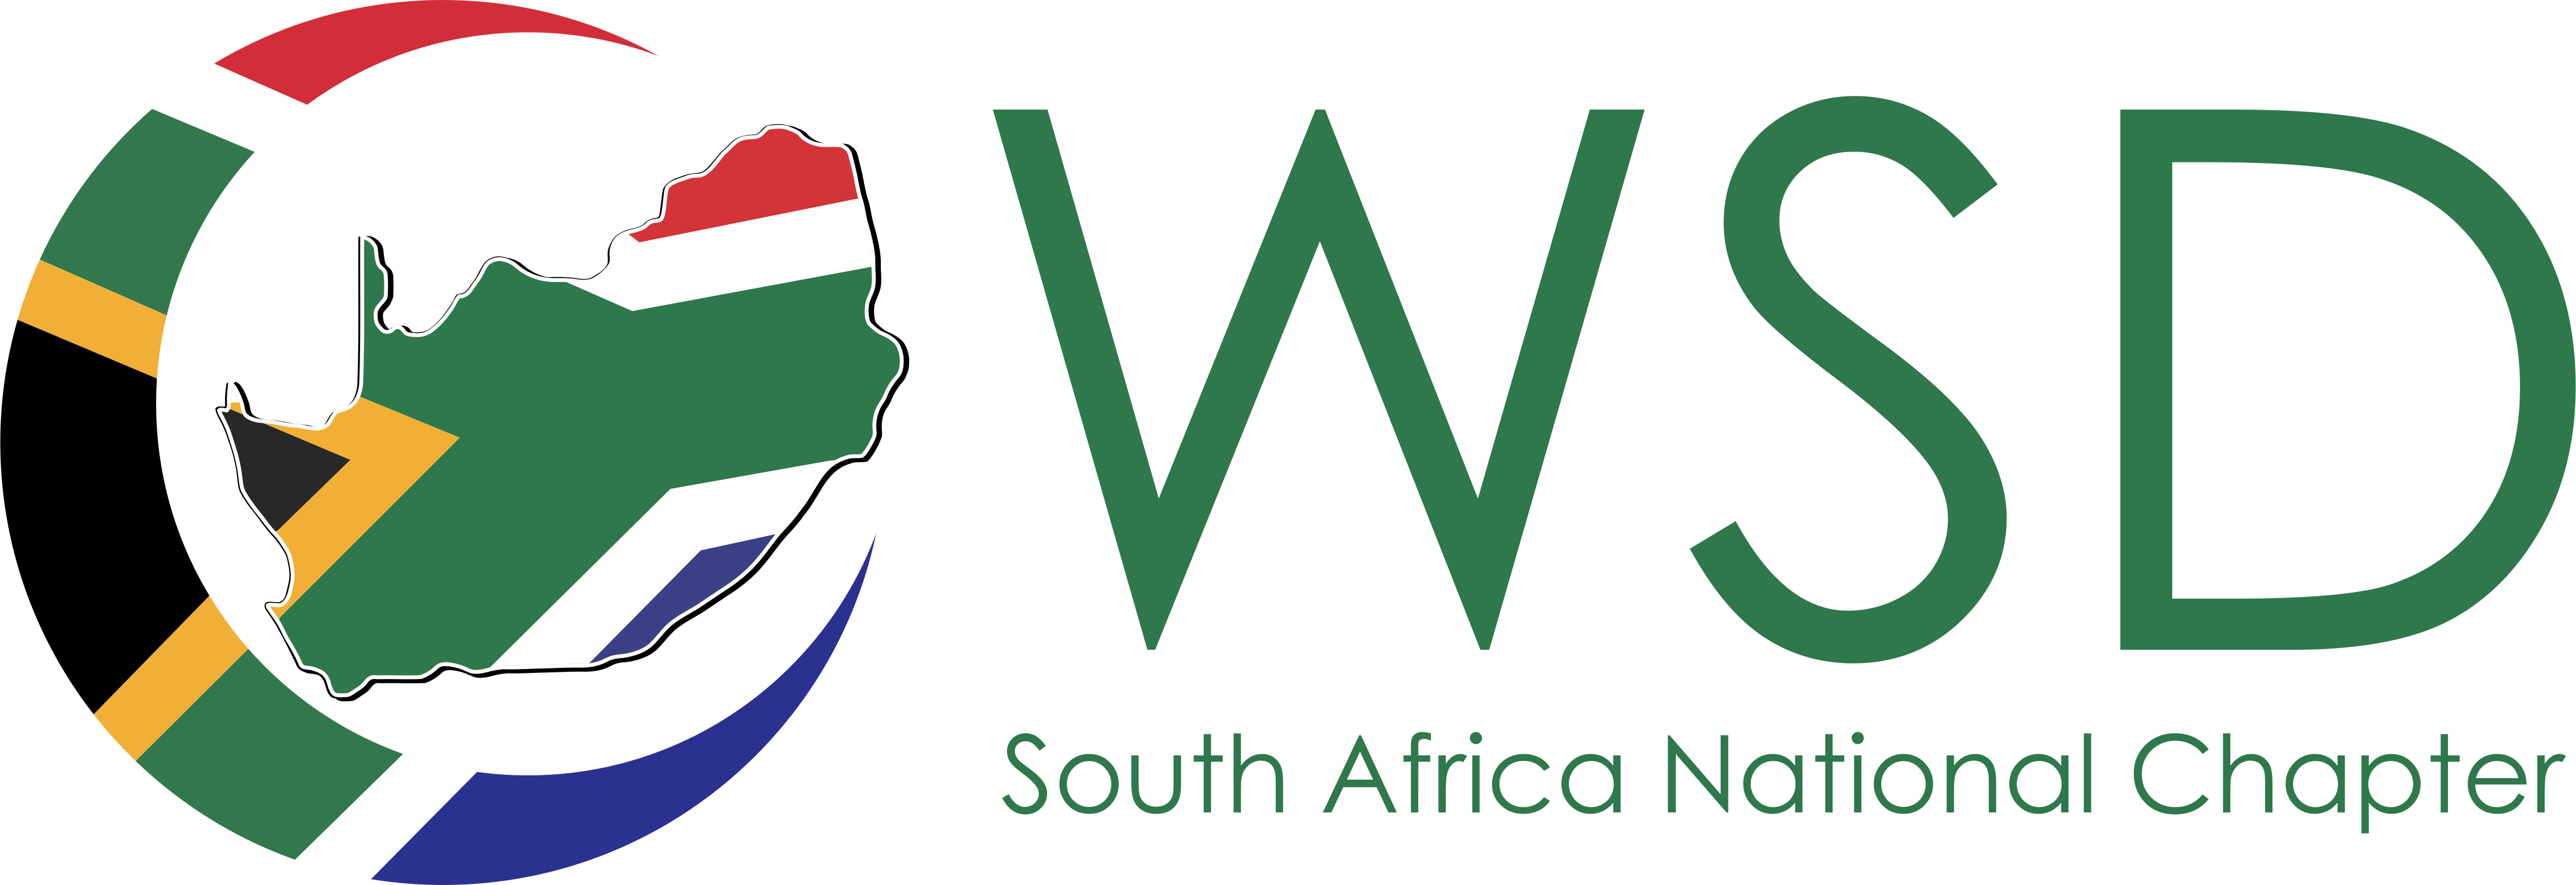 OWSD South African National Chapter